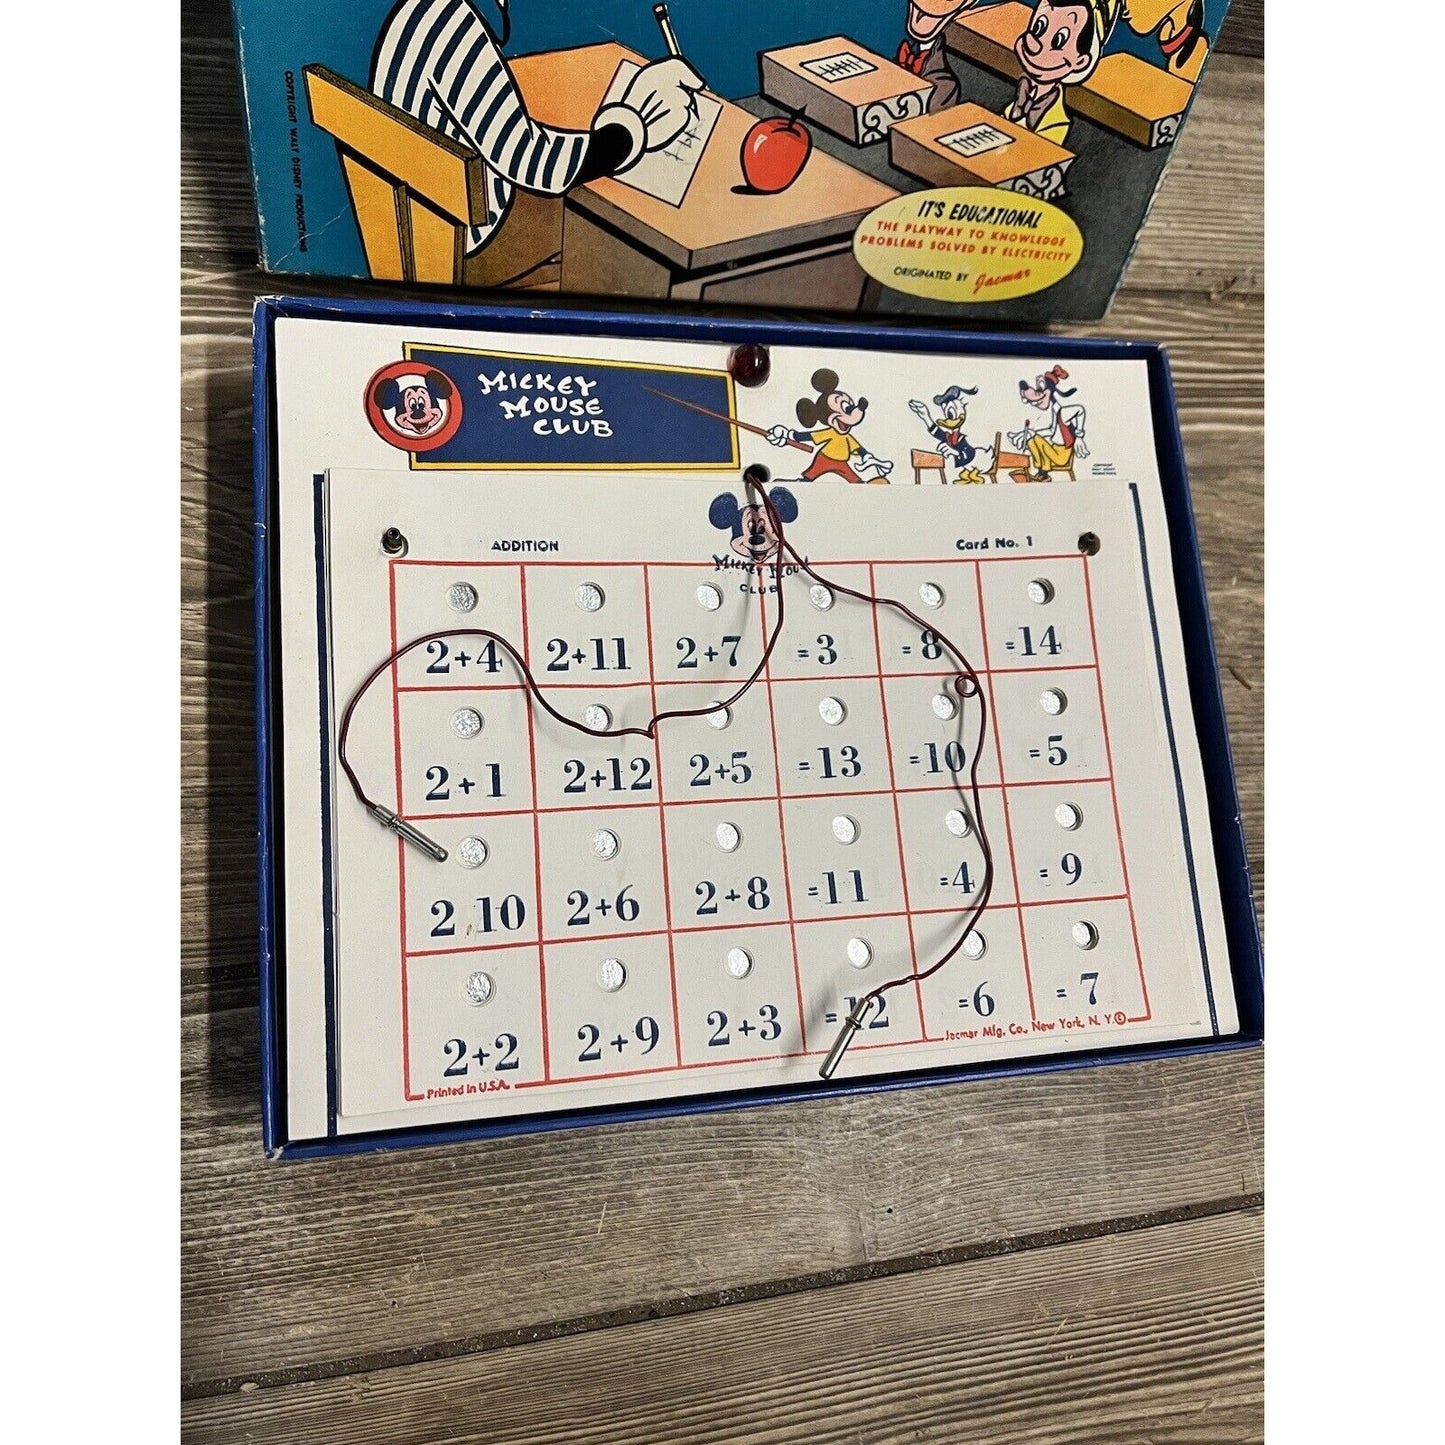 Vintage 1950s Mickey Mouse Club Magic Adder Math Game w/ Box Complete Disney